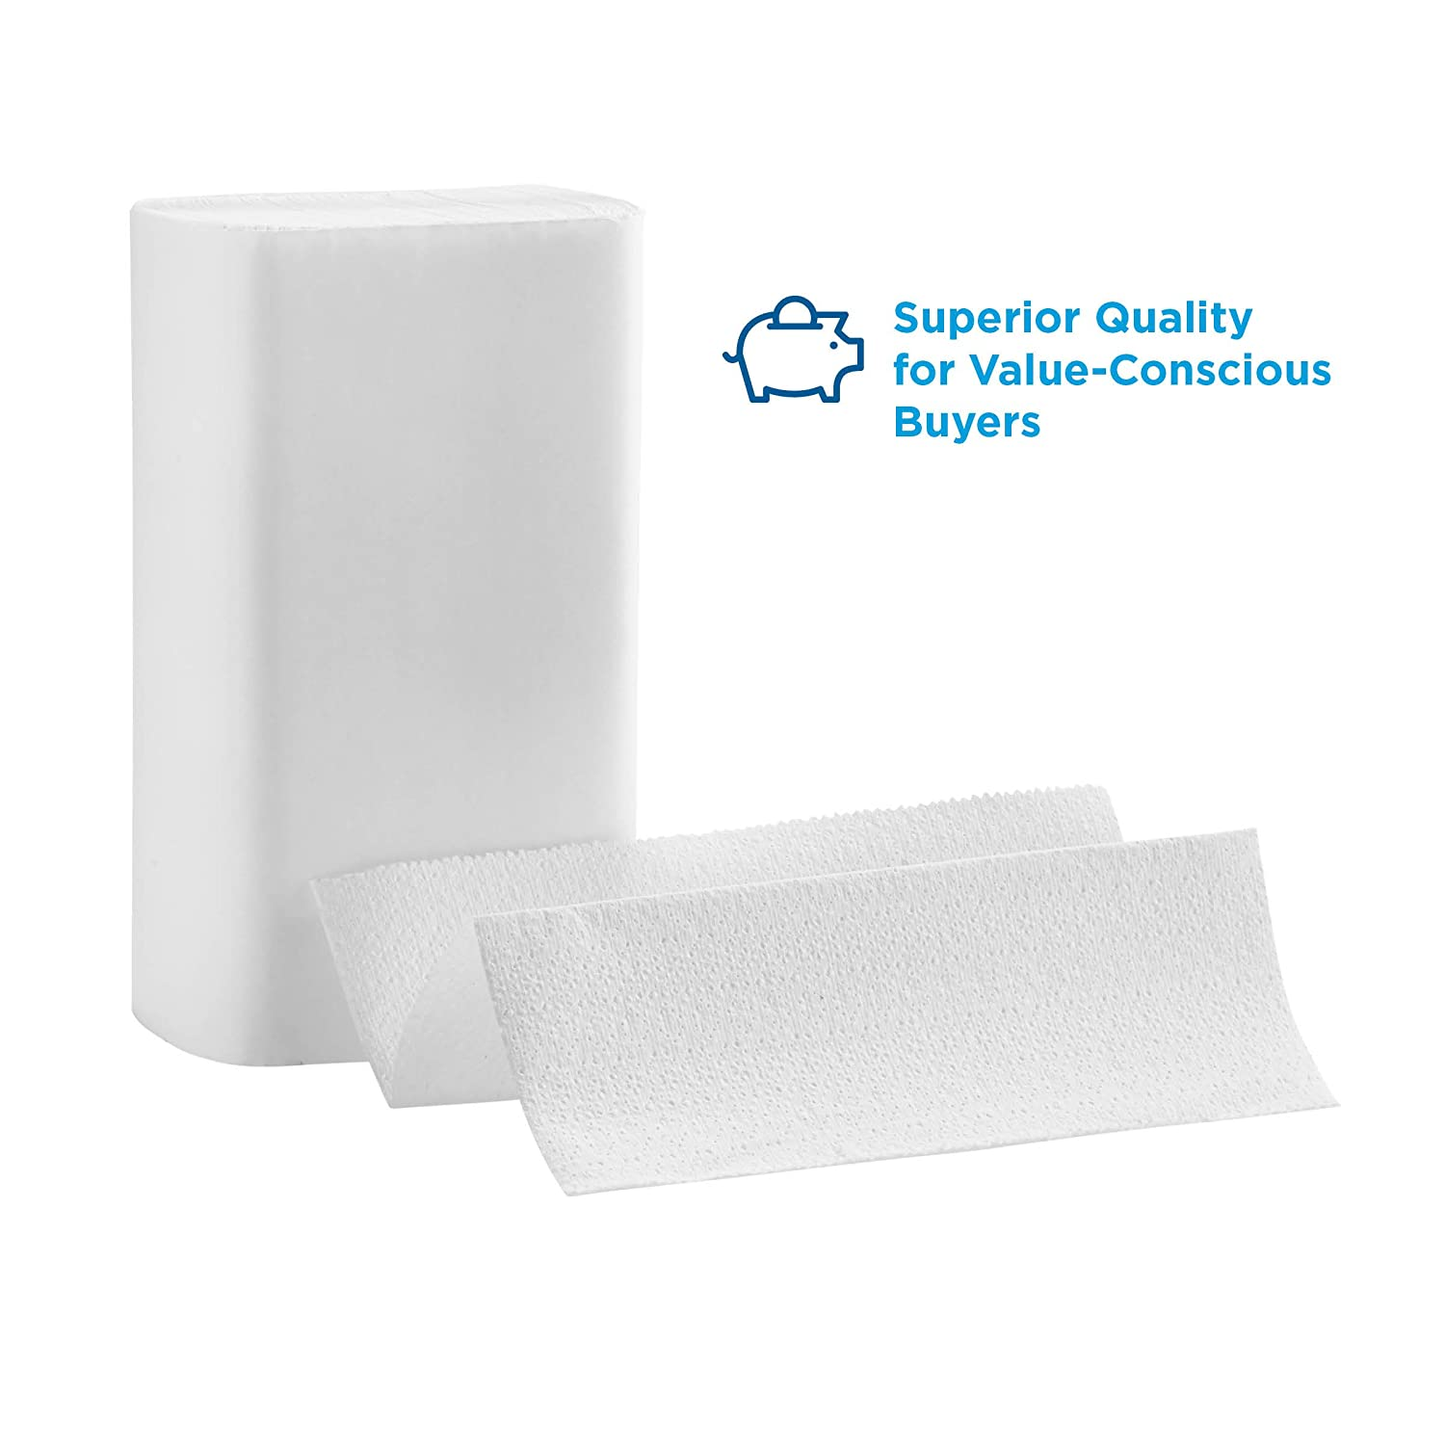 Pacific Blue Select Multifold Premium 2-Ply Paper Towels by GP PRO (), White, 21000, 125 Paper Towels per Pack, 16 Packs per Case